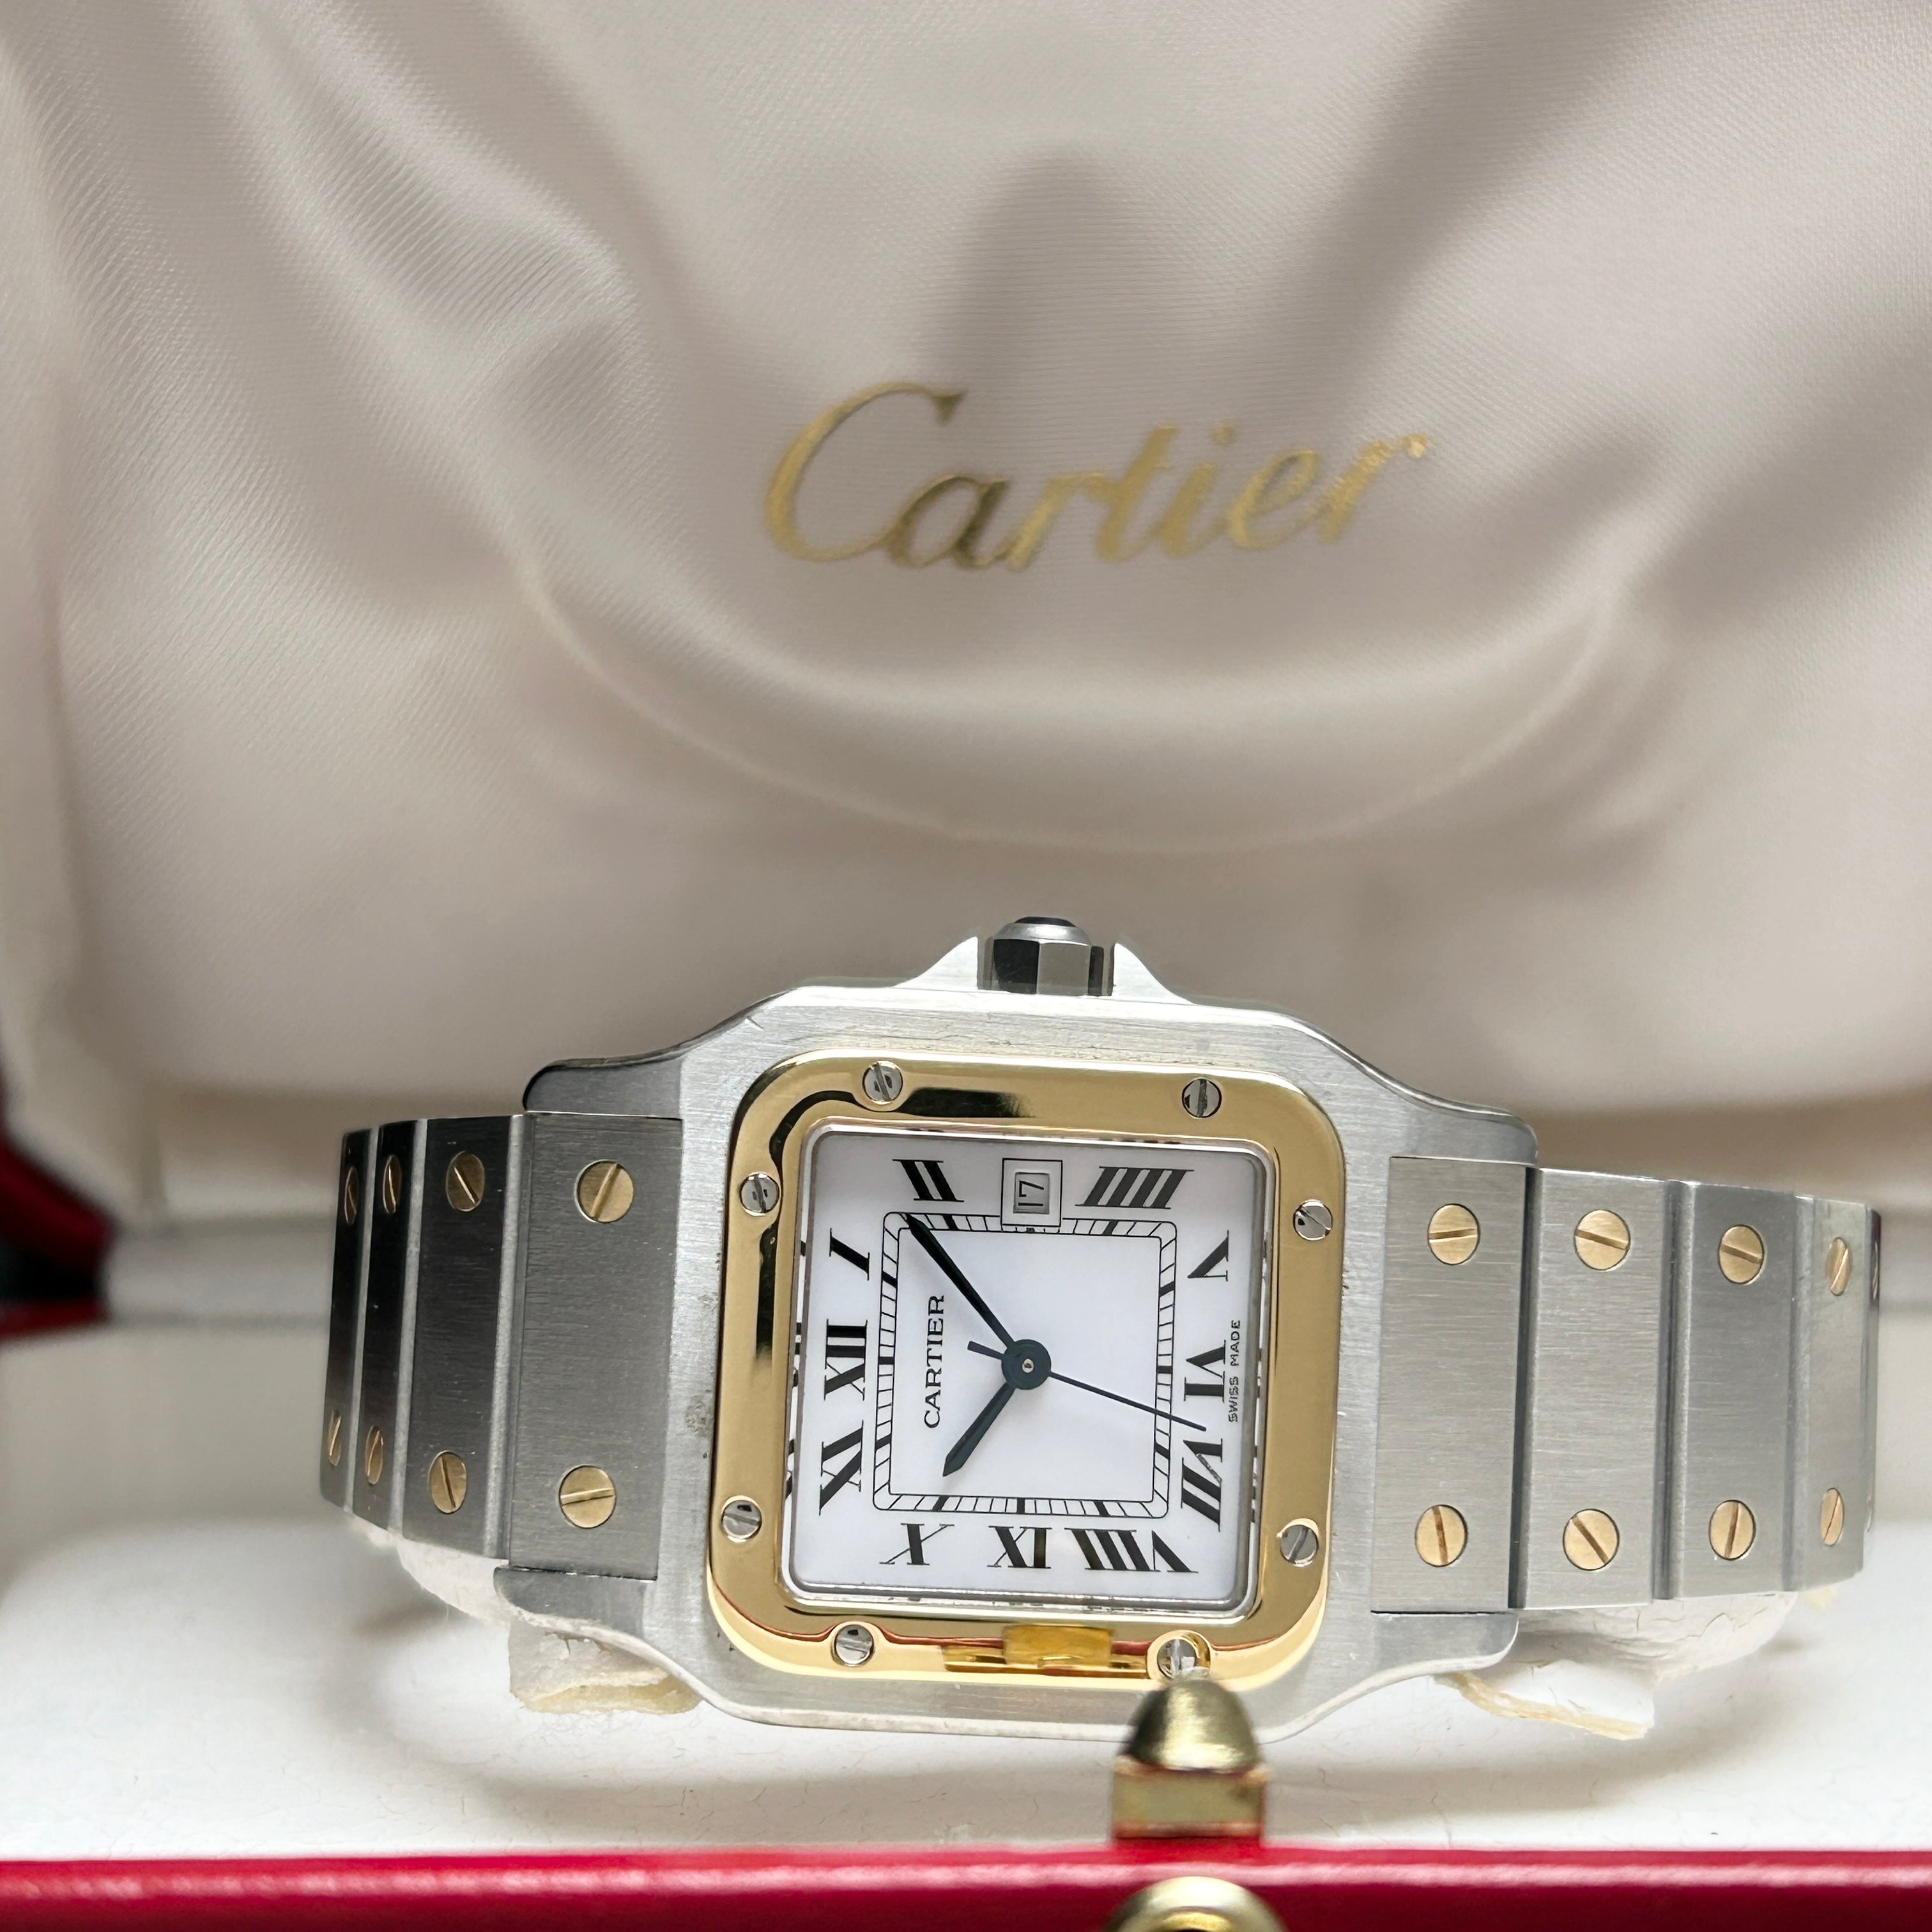 【Cartier】サントスガルベLMコンビ 純正ボックス付き